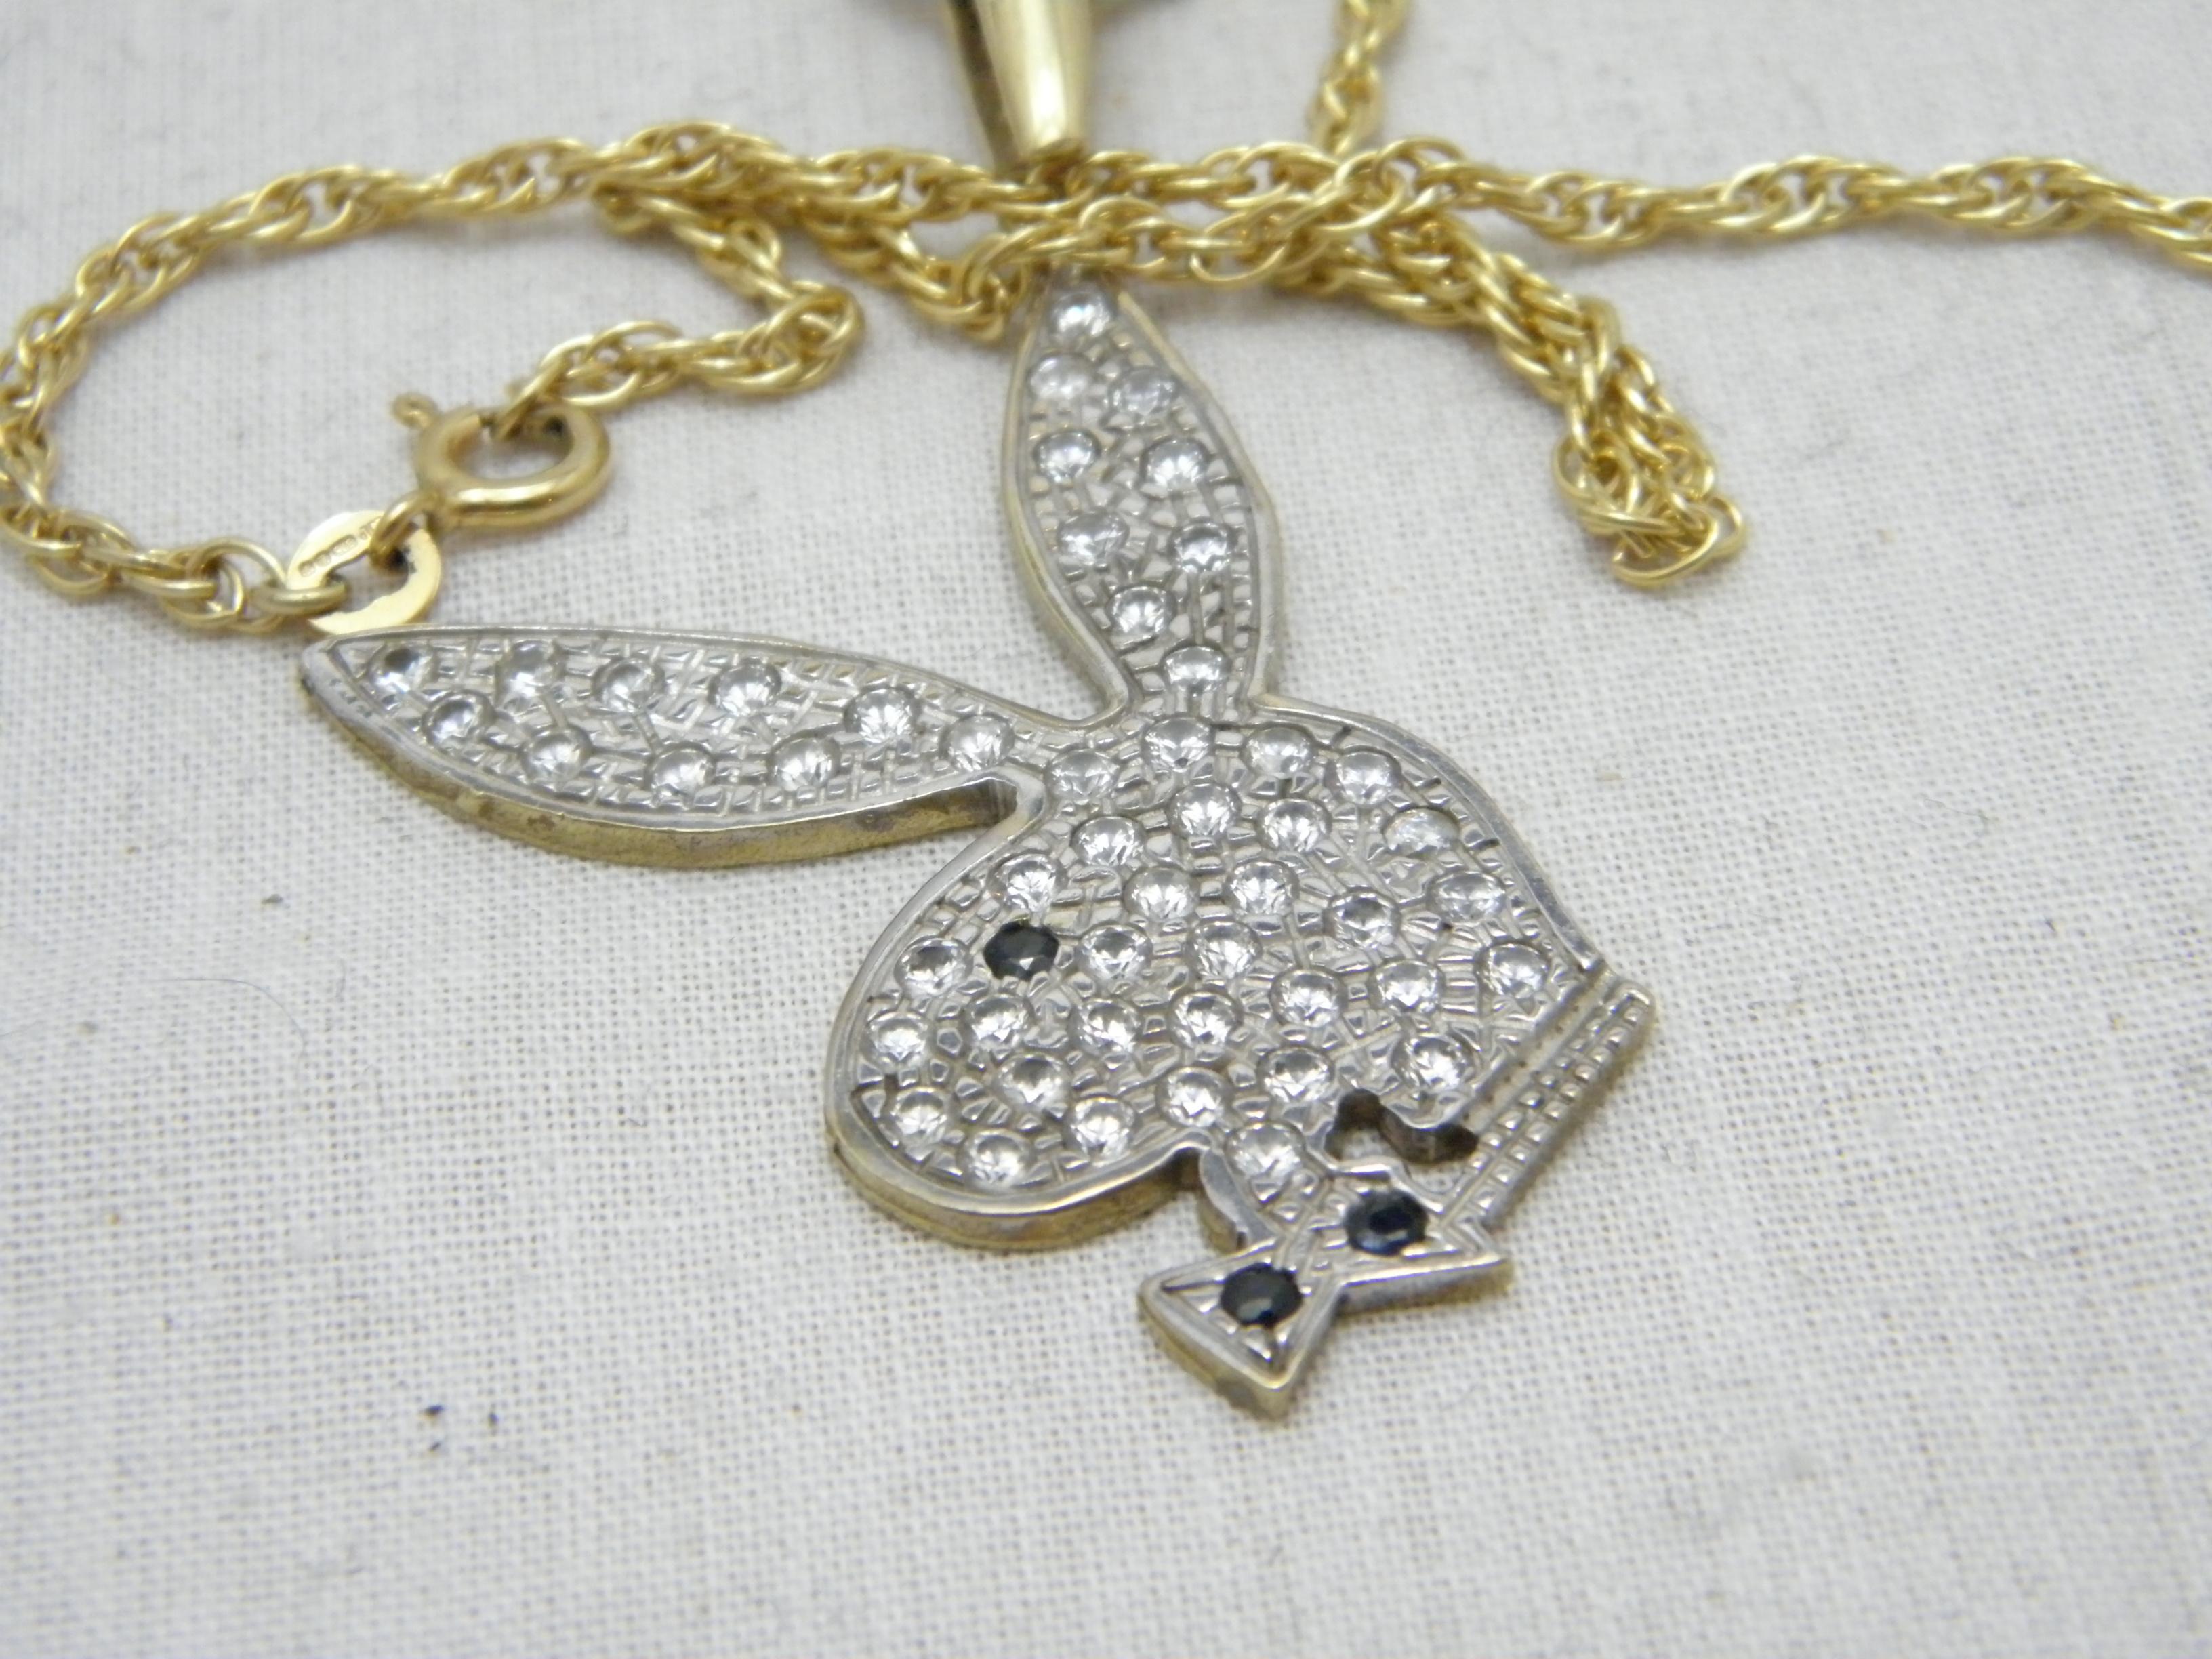 Vintage 9ct Gold Enormous Playboy Bunny Pendant Necklace Rope Chain 375 20 Inch For Sale 1